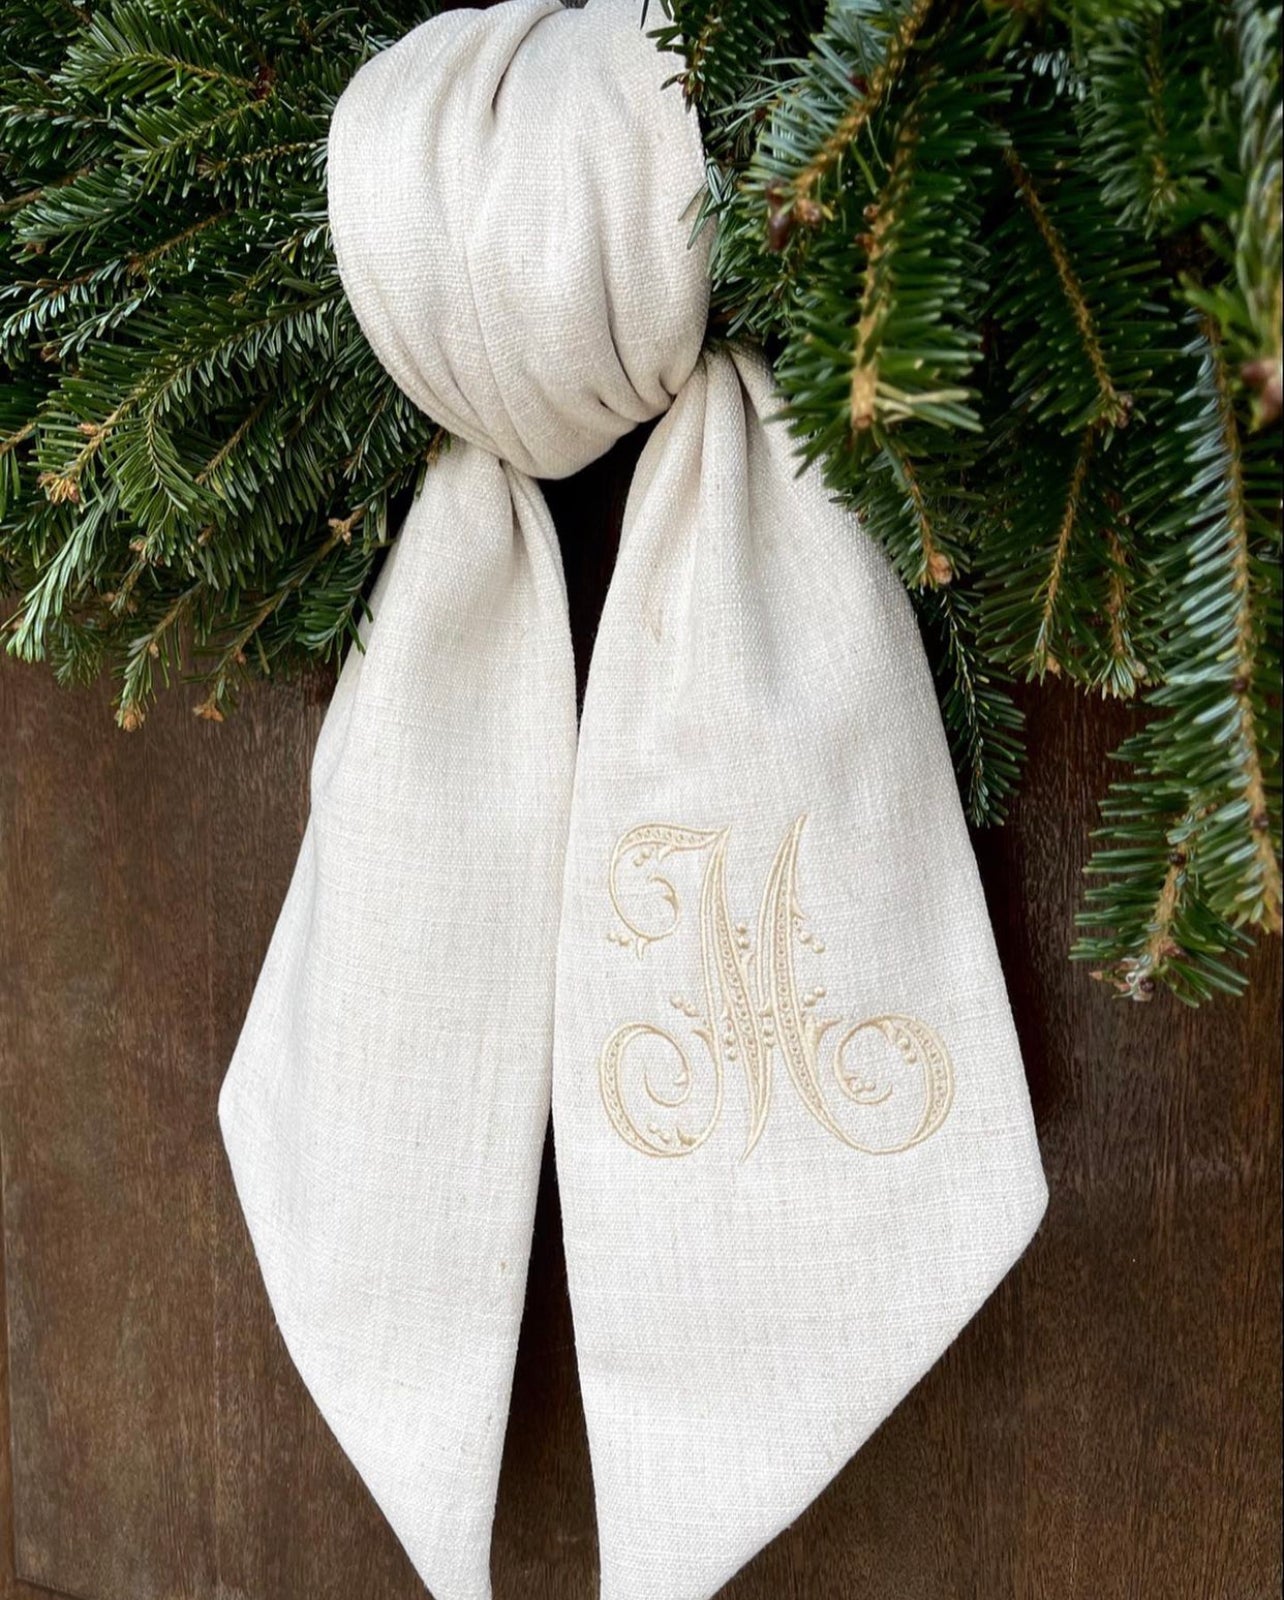 Wreath Sash with Berry Monogram – OliveBranchEmbroidery